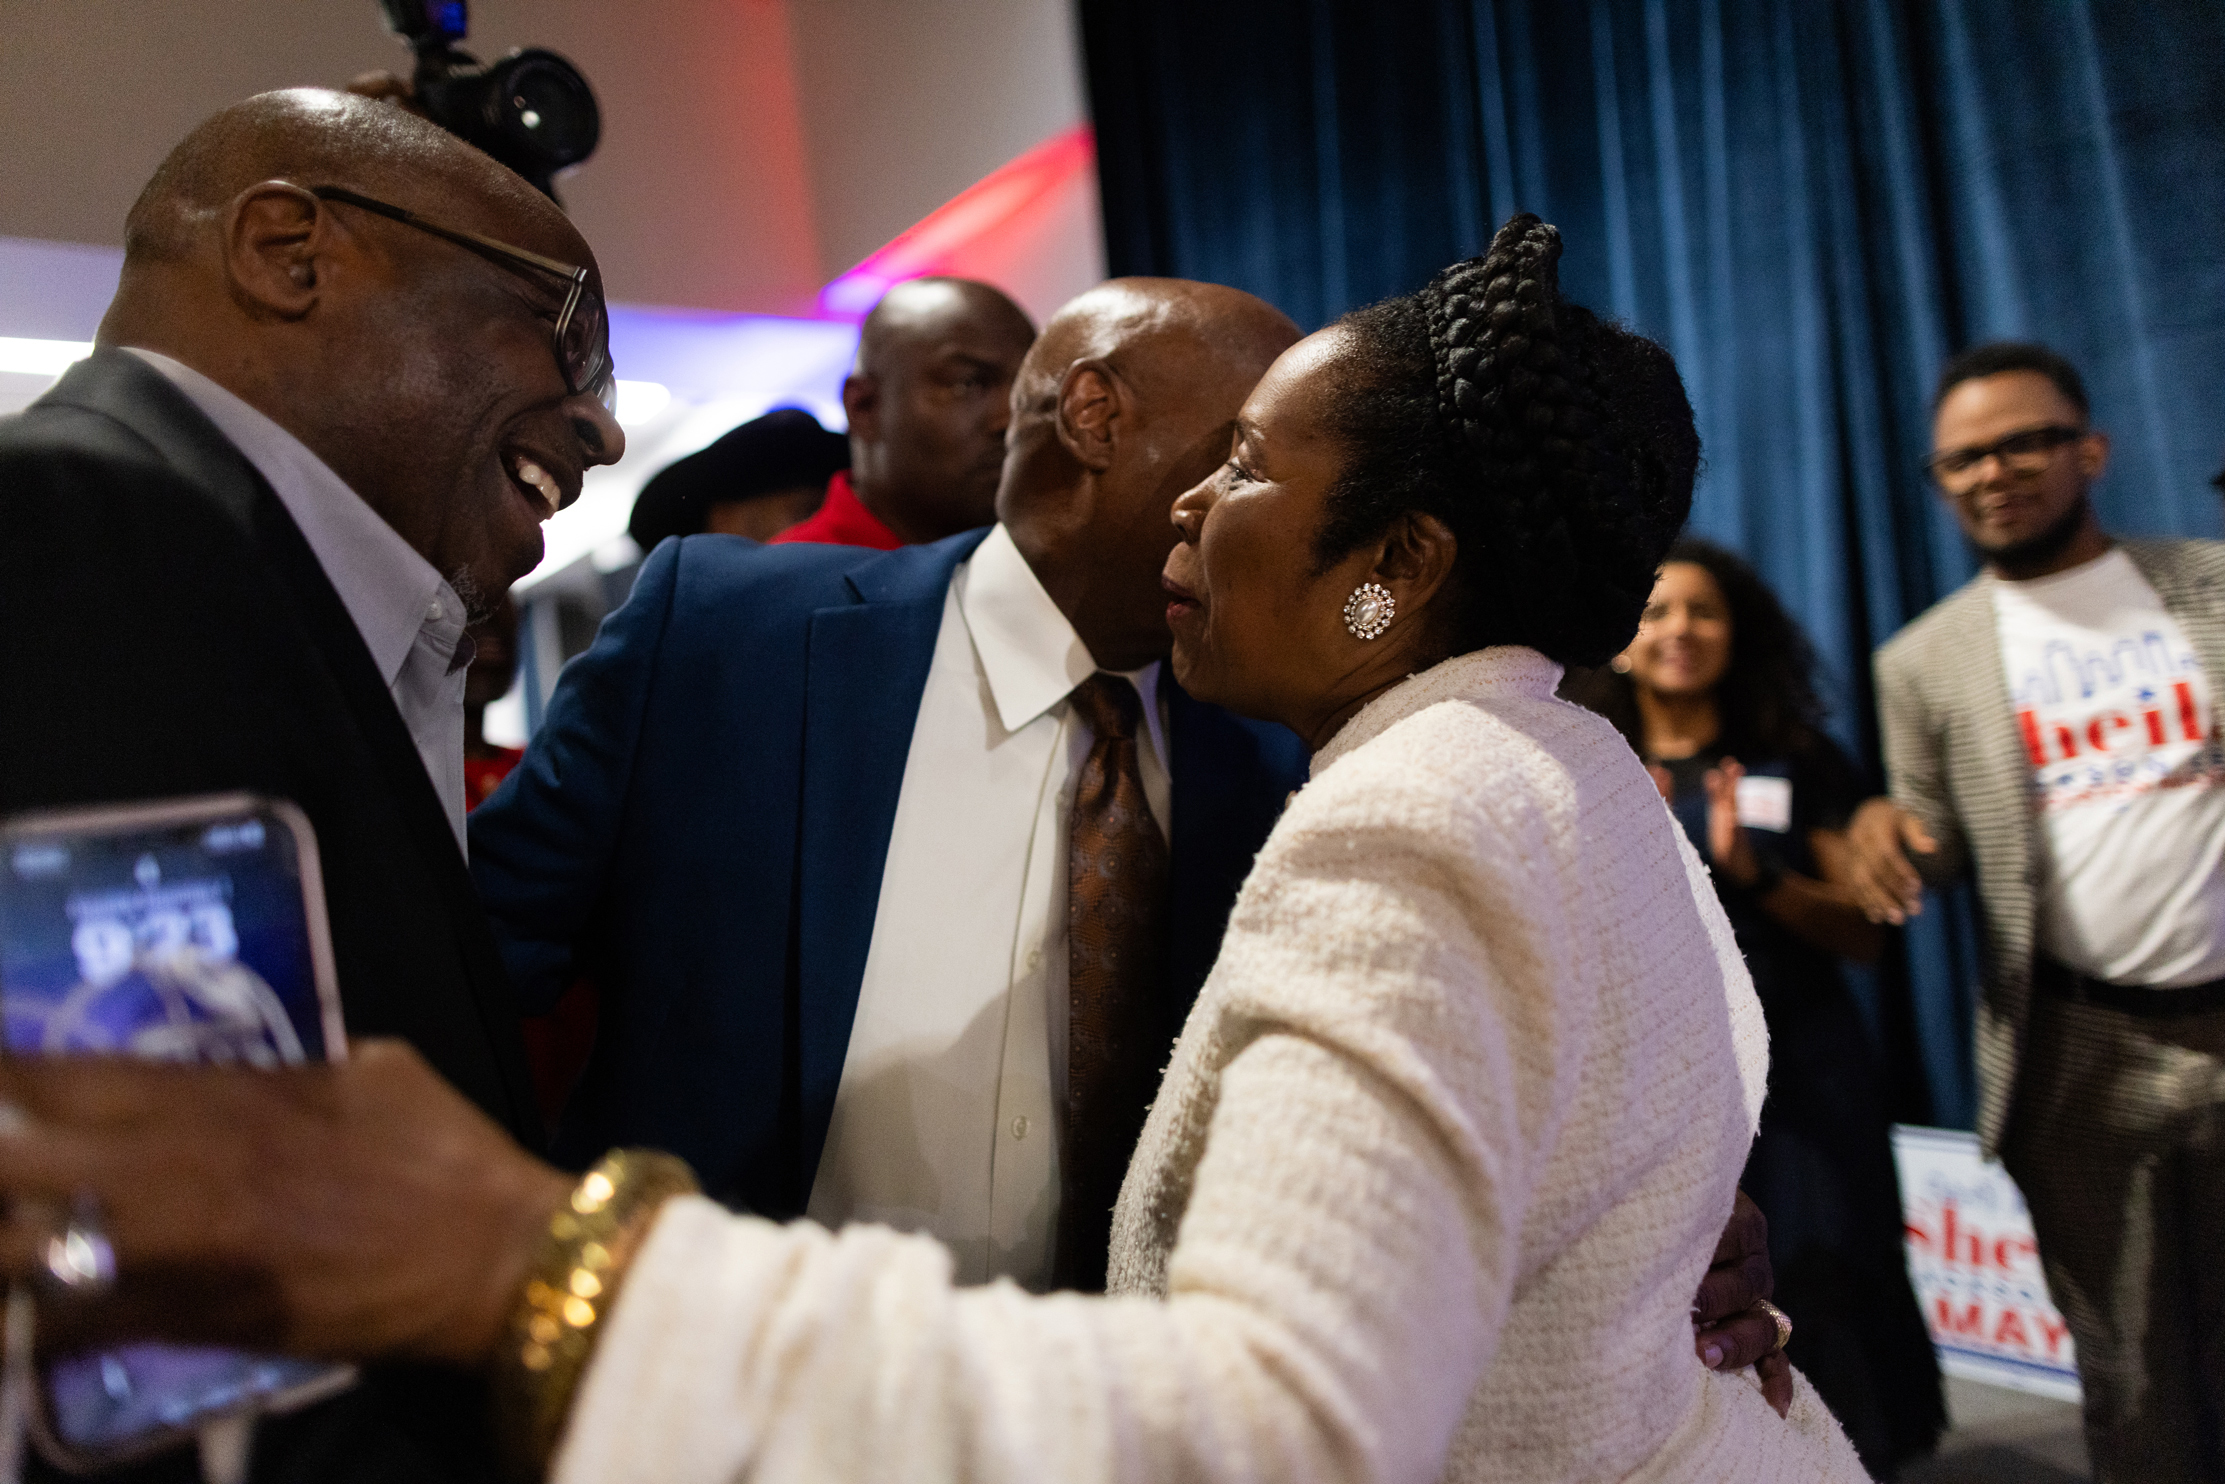 Congresswoman and Houston mayoral candidate Sheila Jackson Lee is embraced and cheered on at her election night watch party